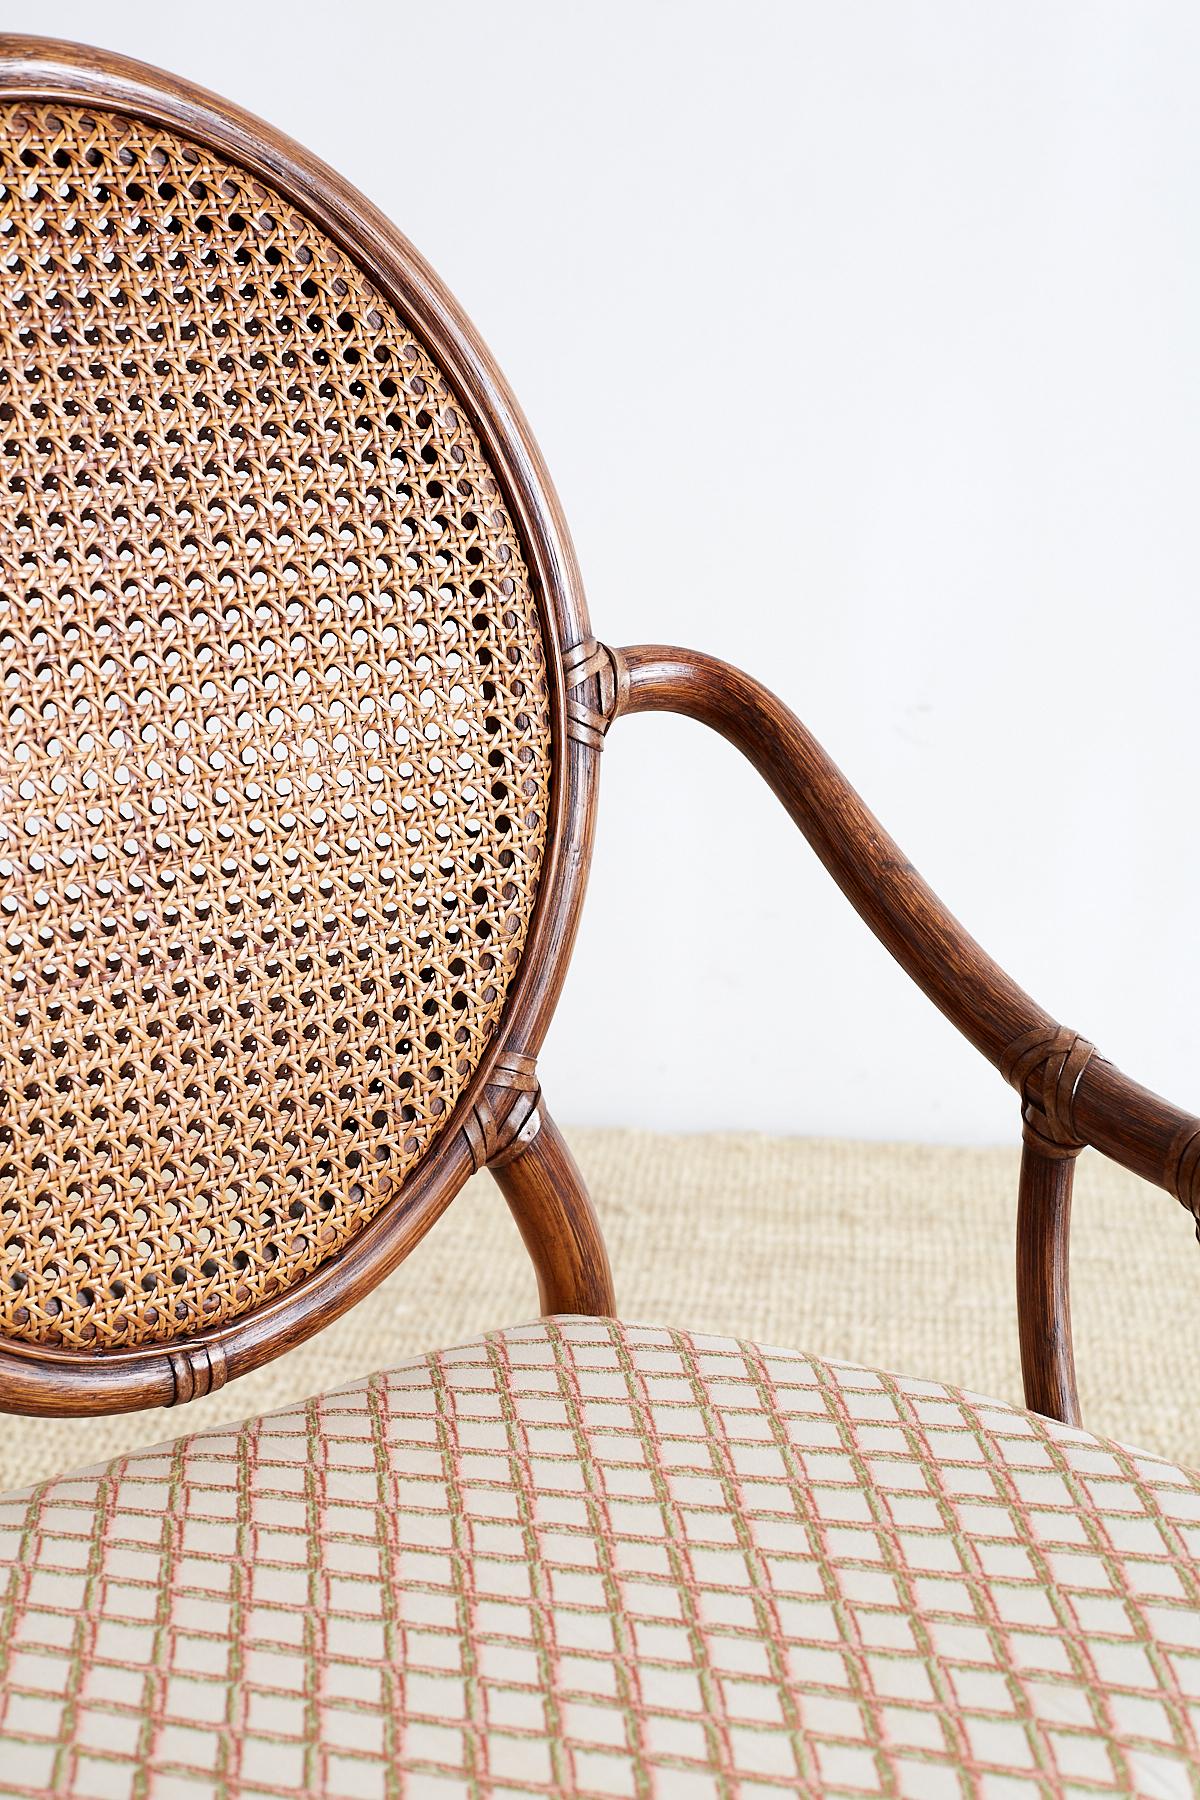 Cane Set of Four Organic Modern Rattan Armchairs by McGuire